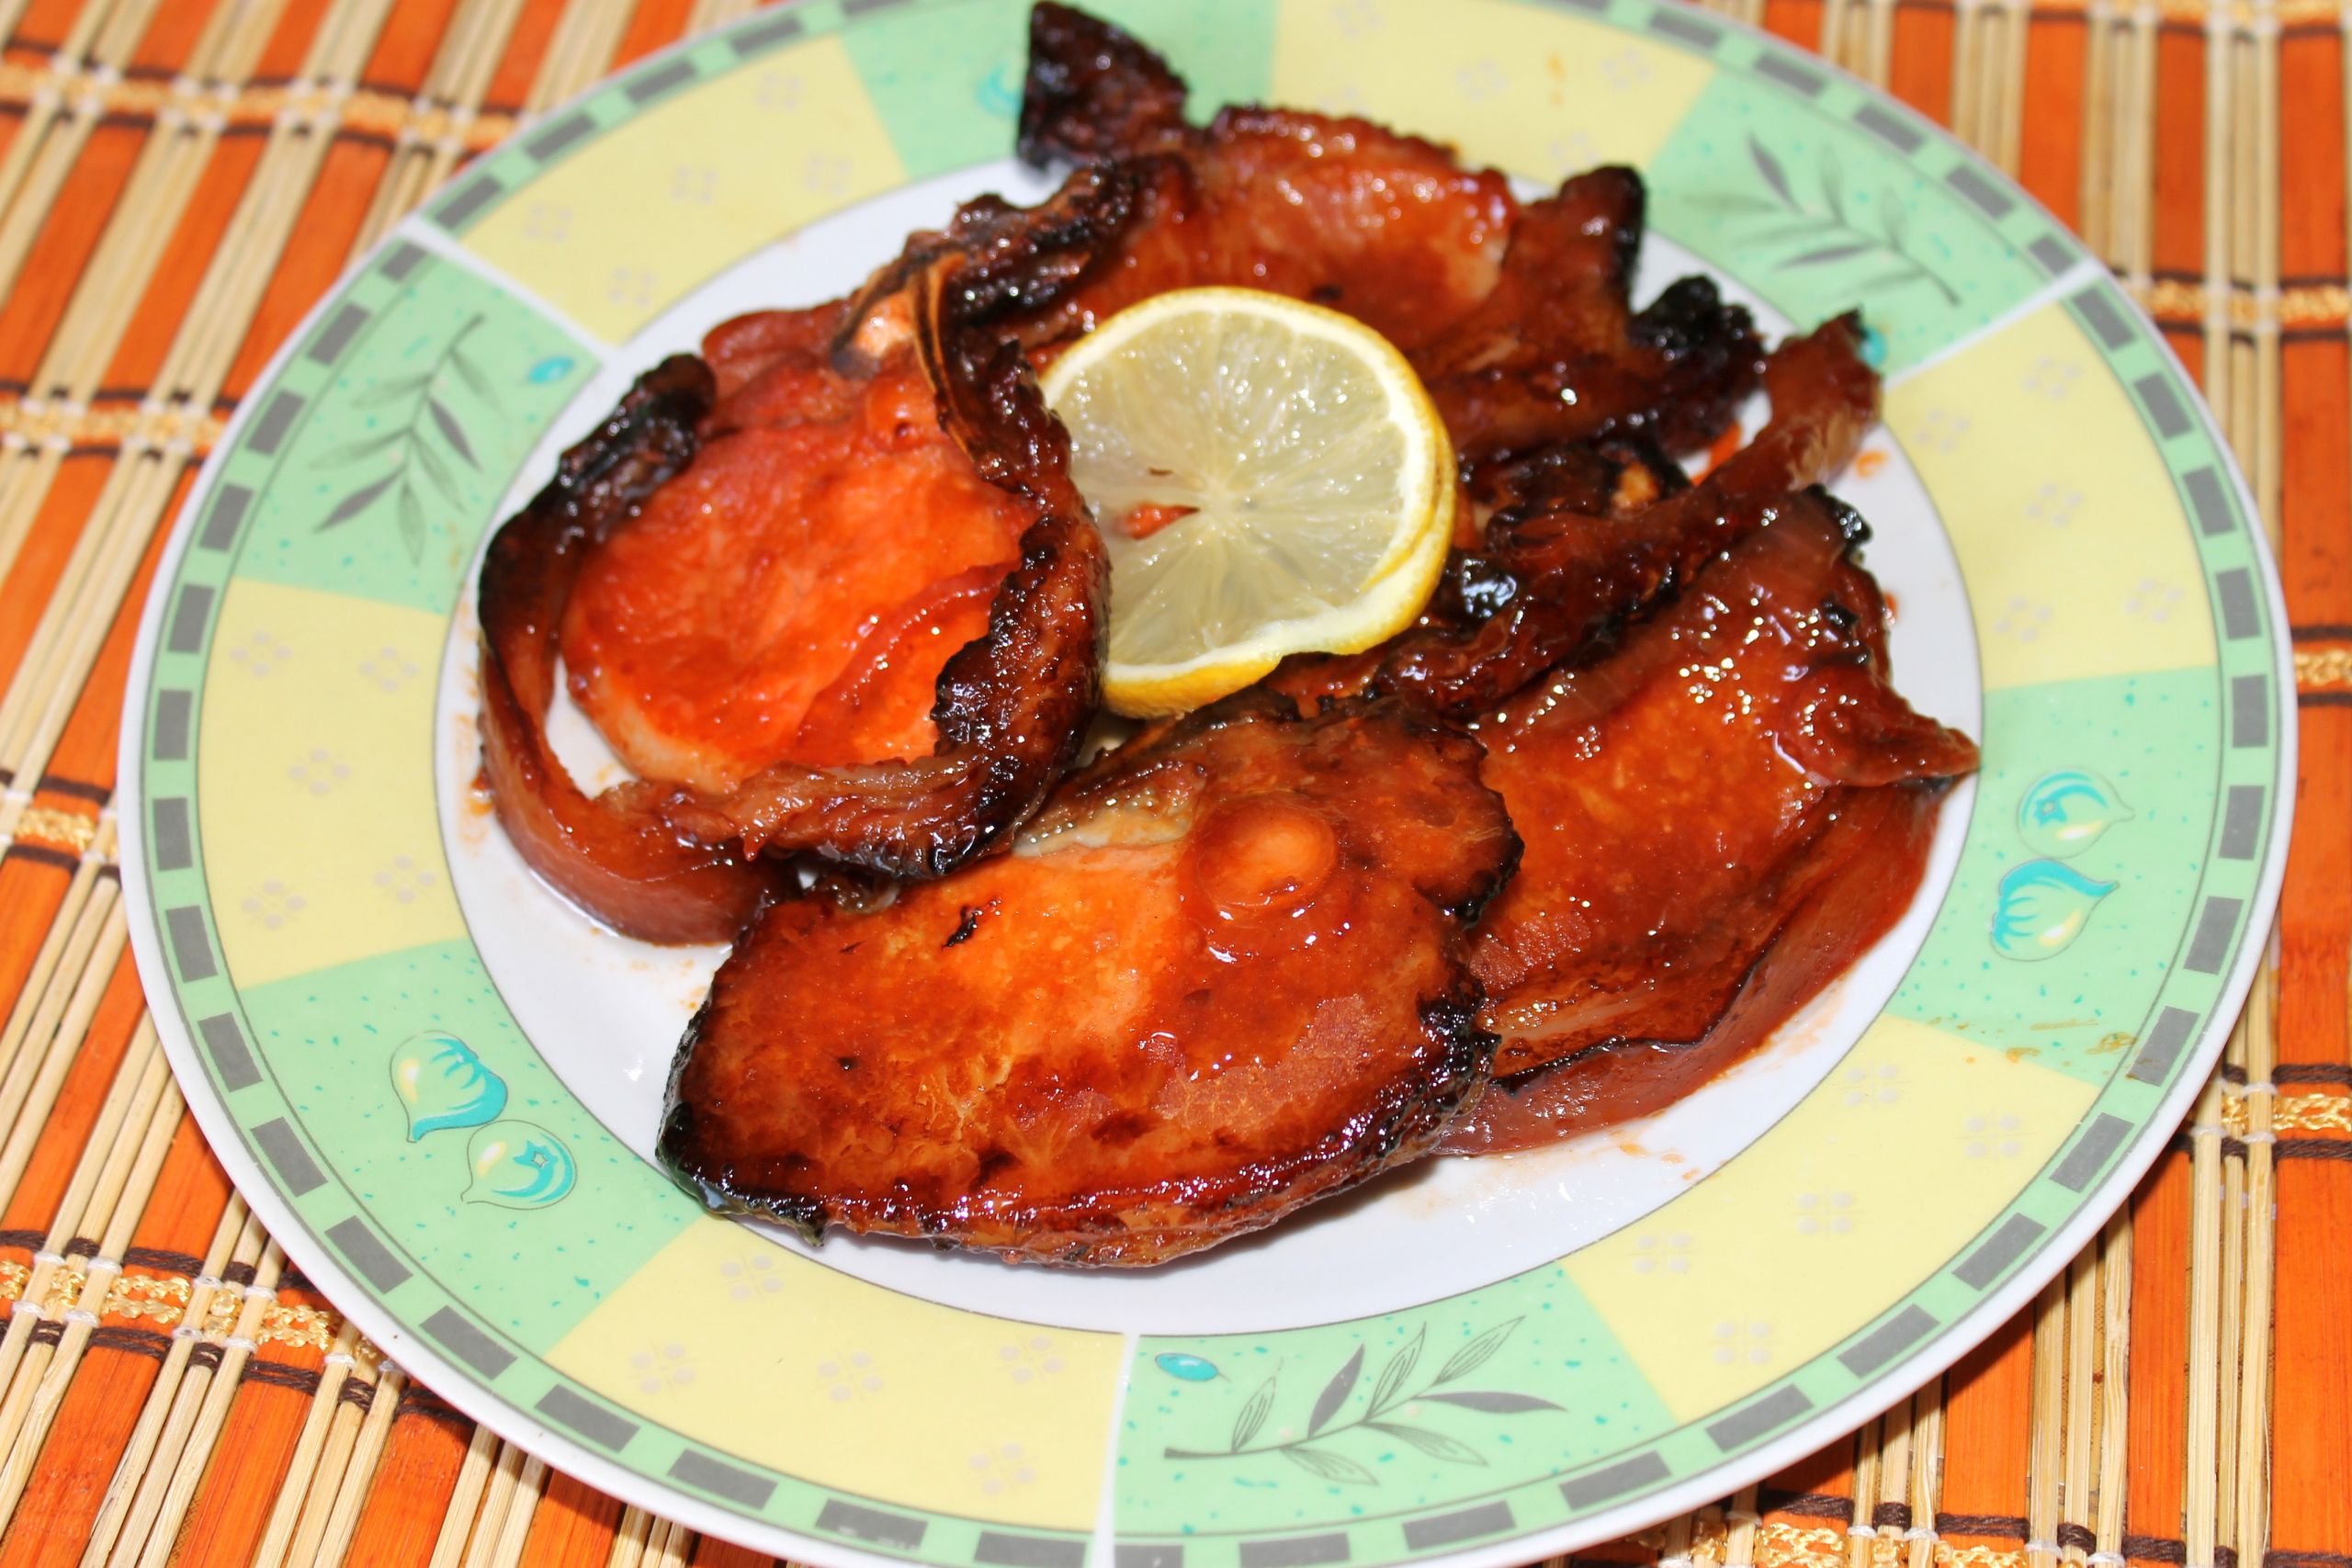 Bbq Pork Chops In Oven
 How to Make Oven Barbecued Pork Chops 6 Steps with